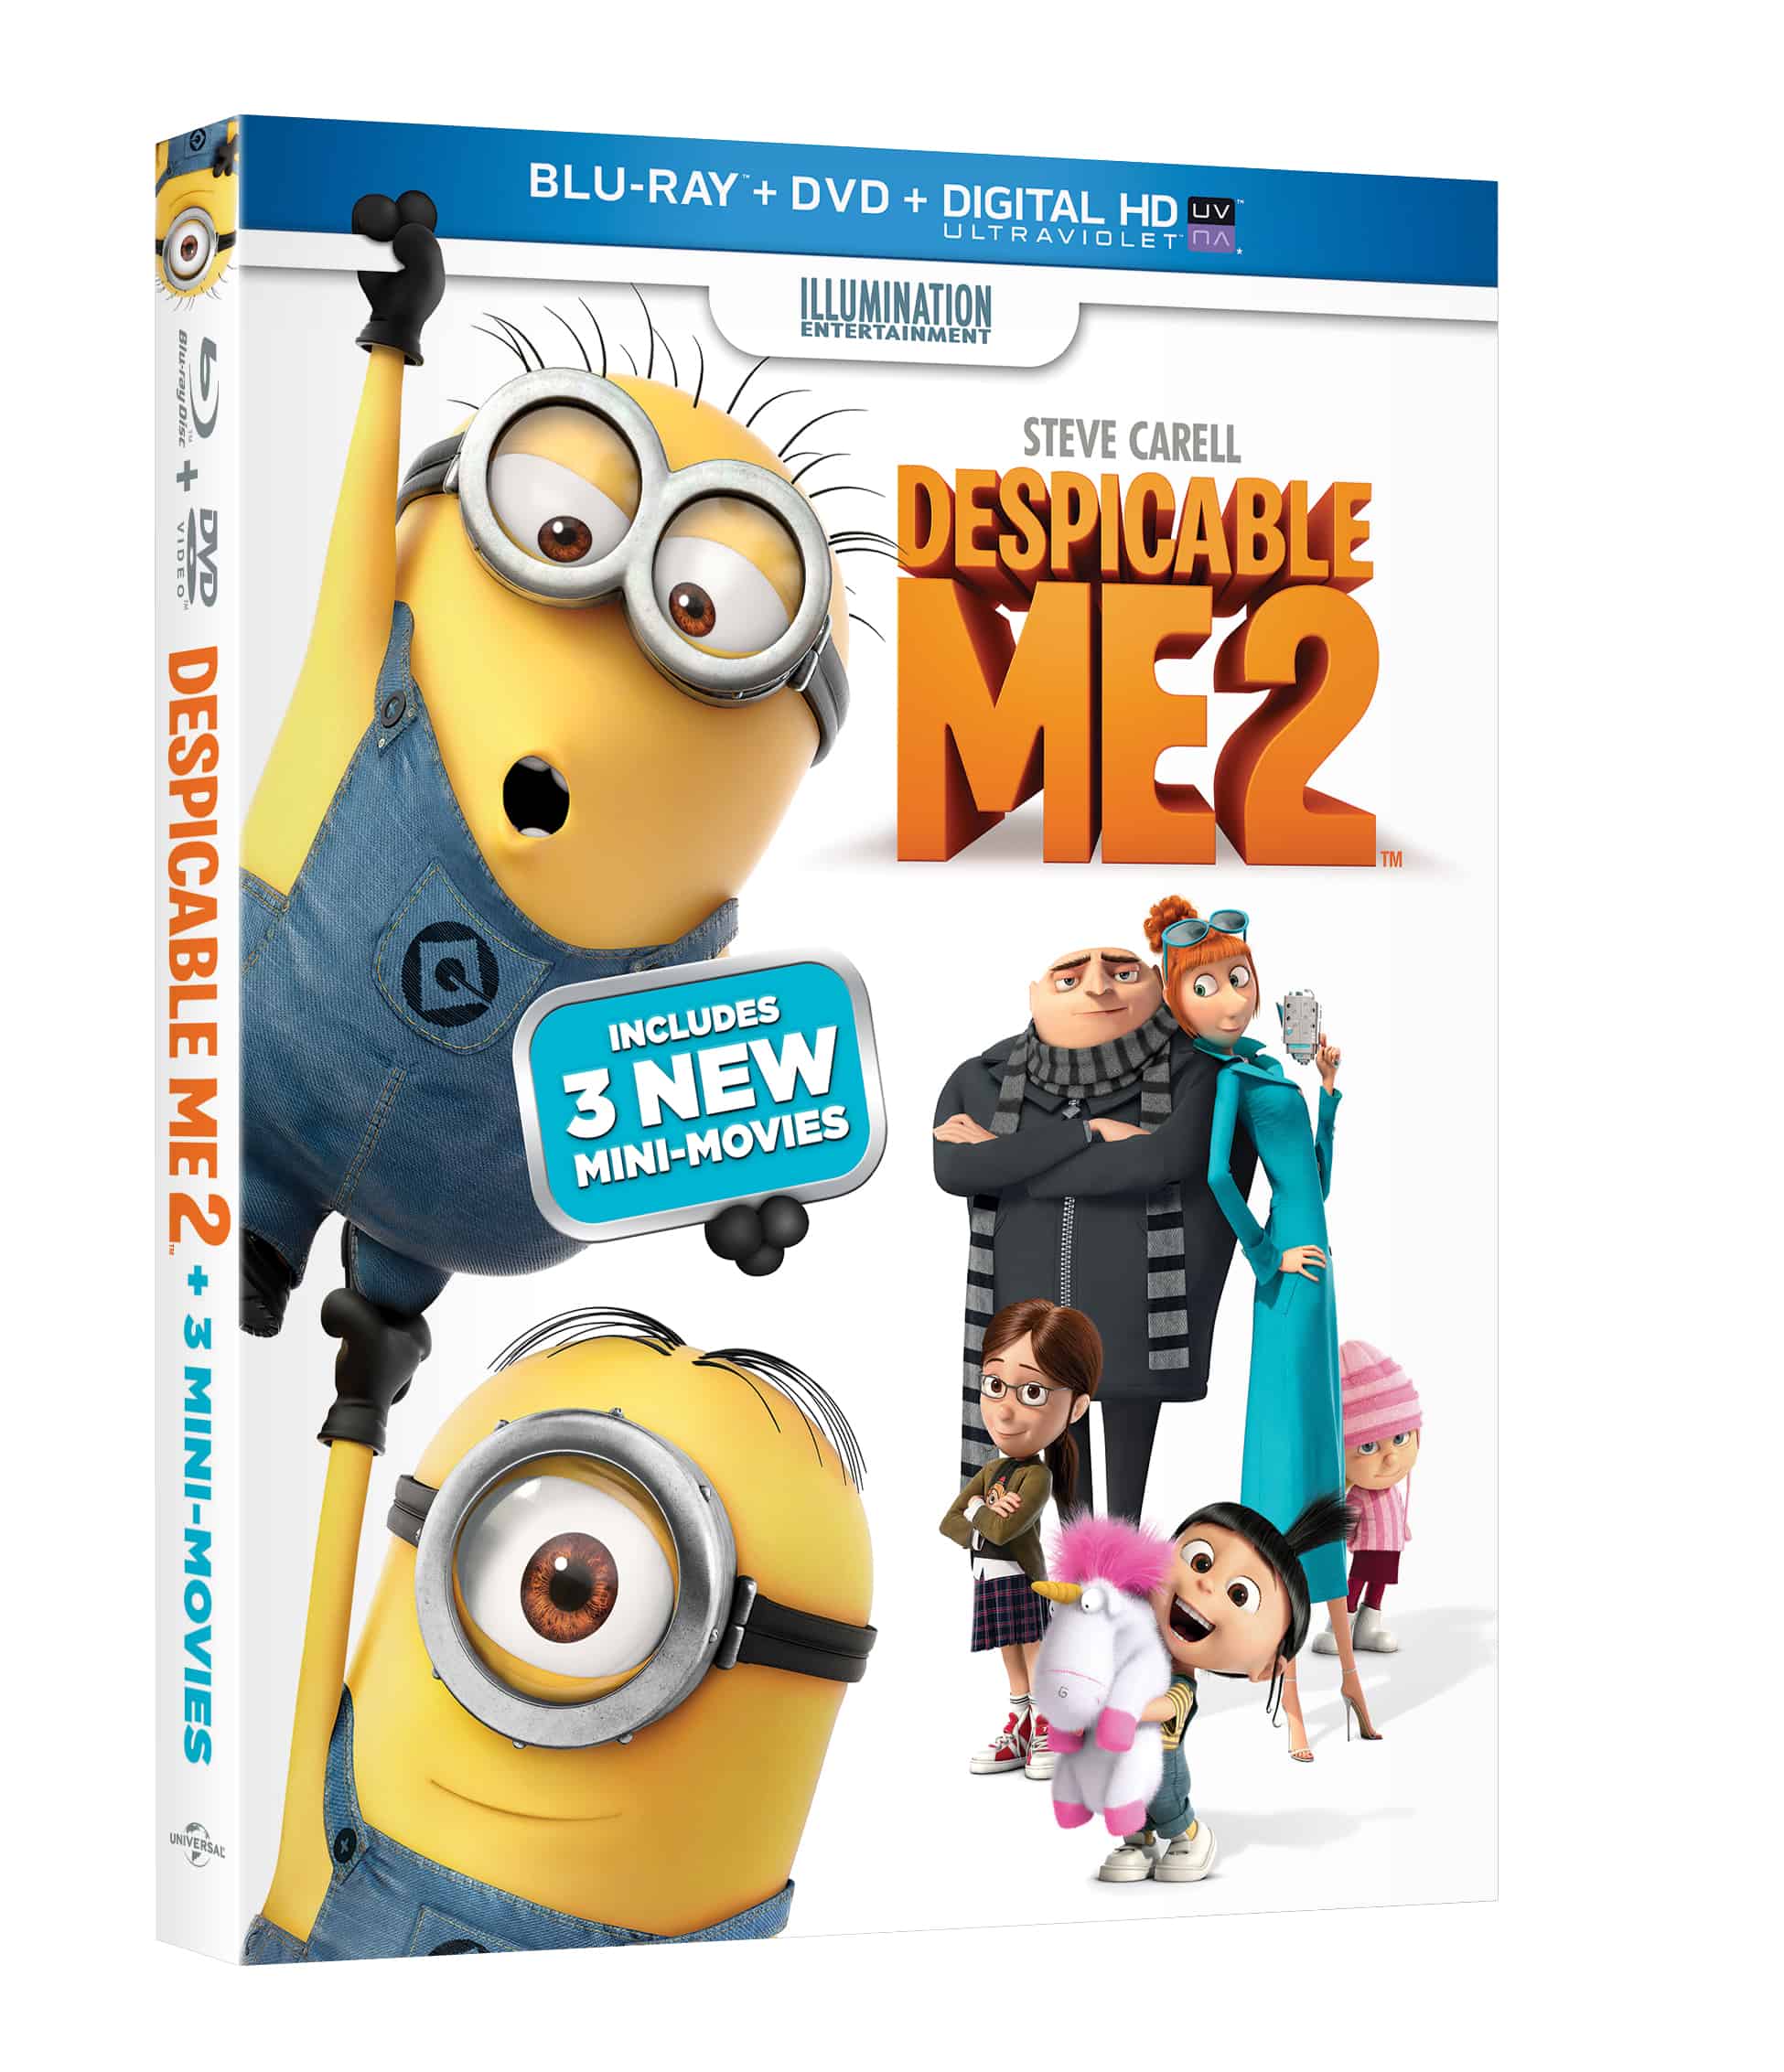 Despicable Me 2 with Steve Carell Blu-ray/DVD/Digital HD Review - Enza's  Bargains